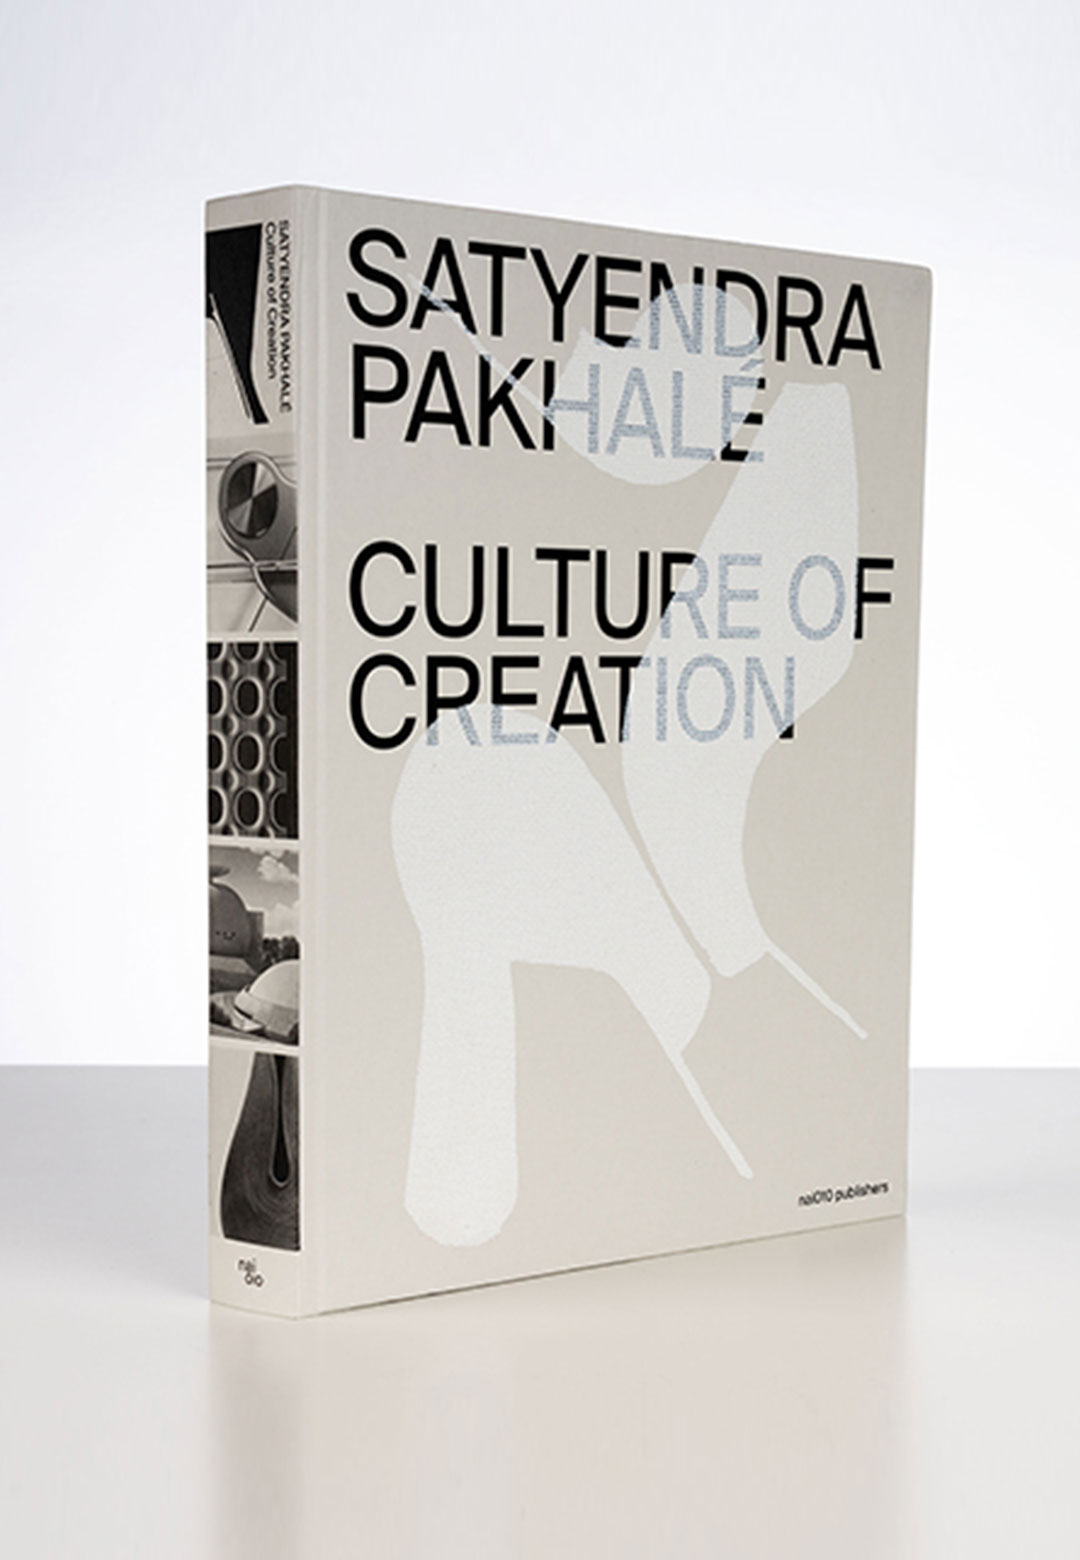 Satyendra Pakhalé’s ‘Culture of Creation’ explores the role of design in the pandemic era